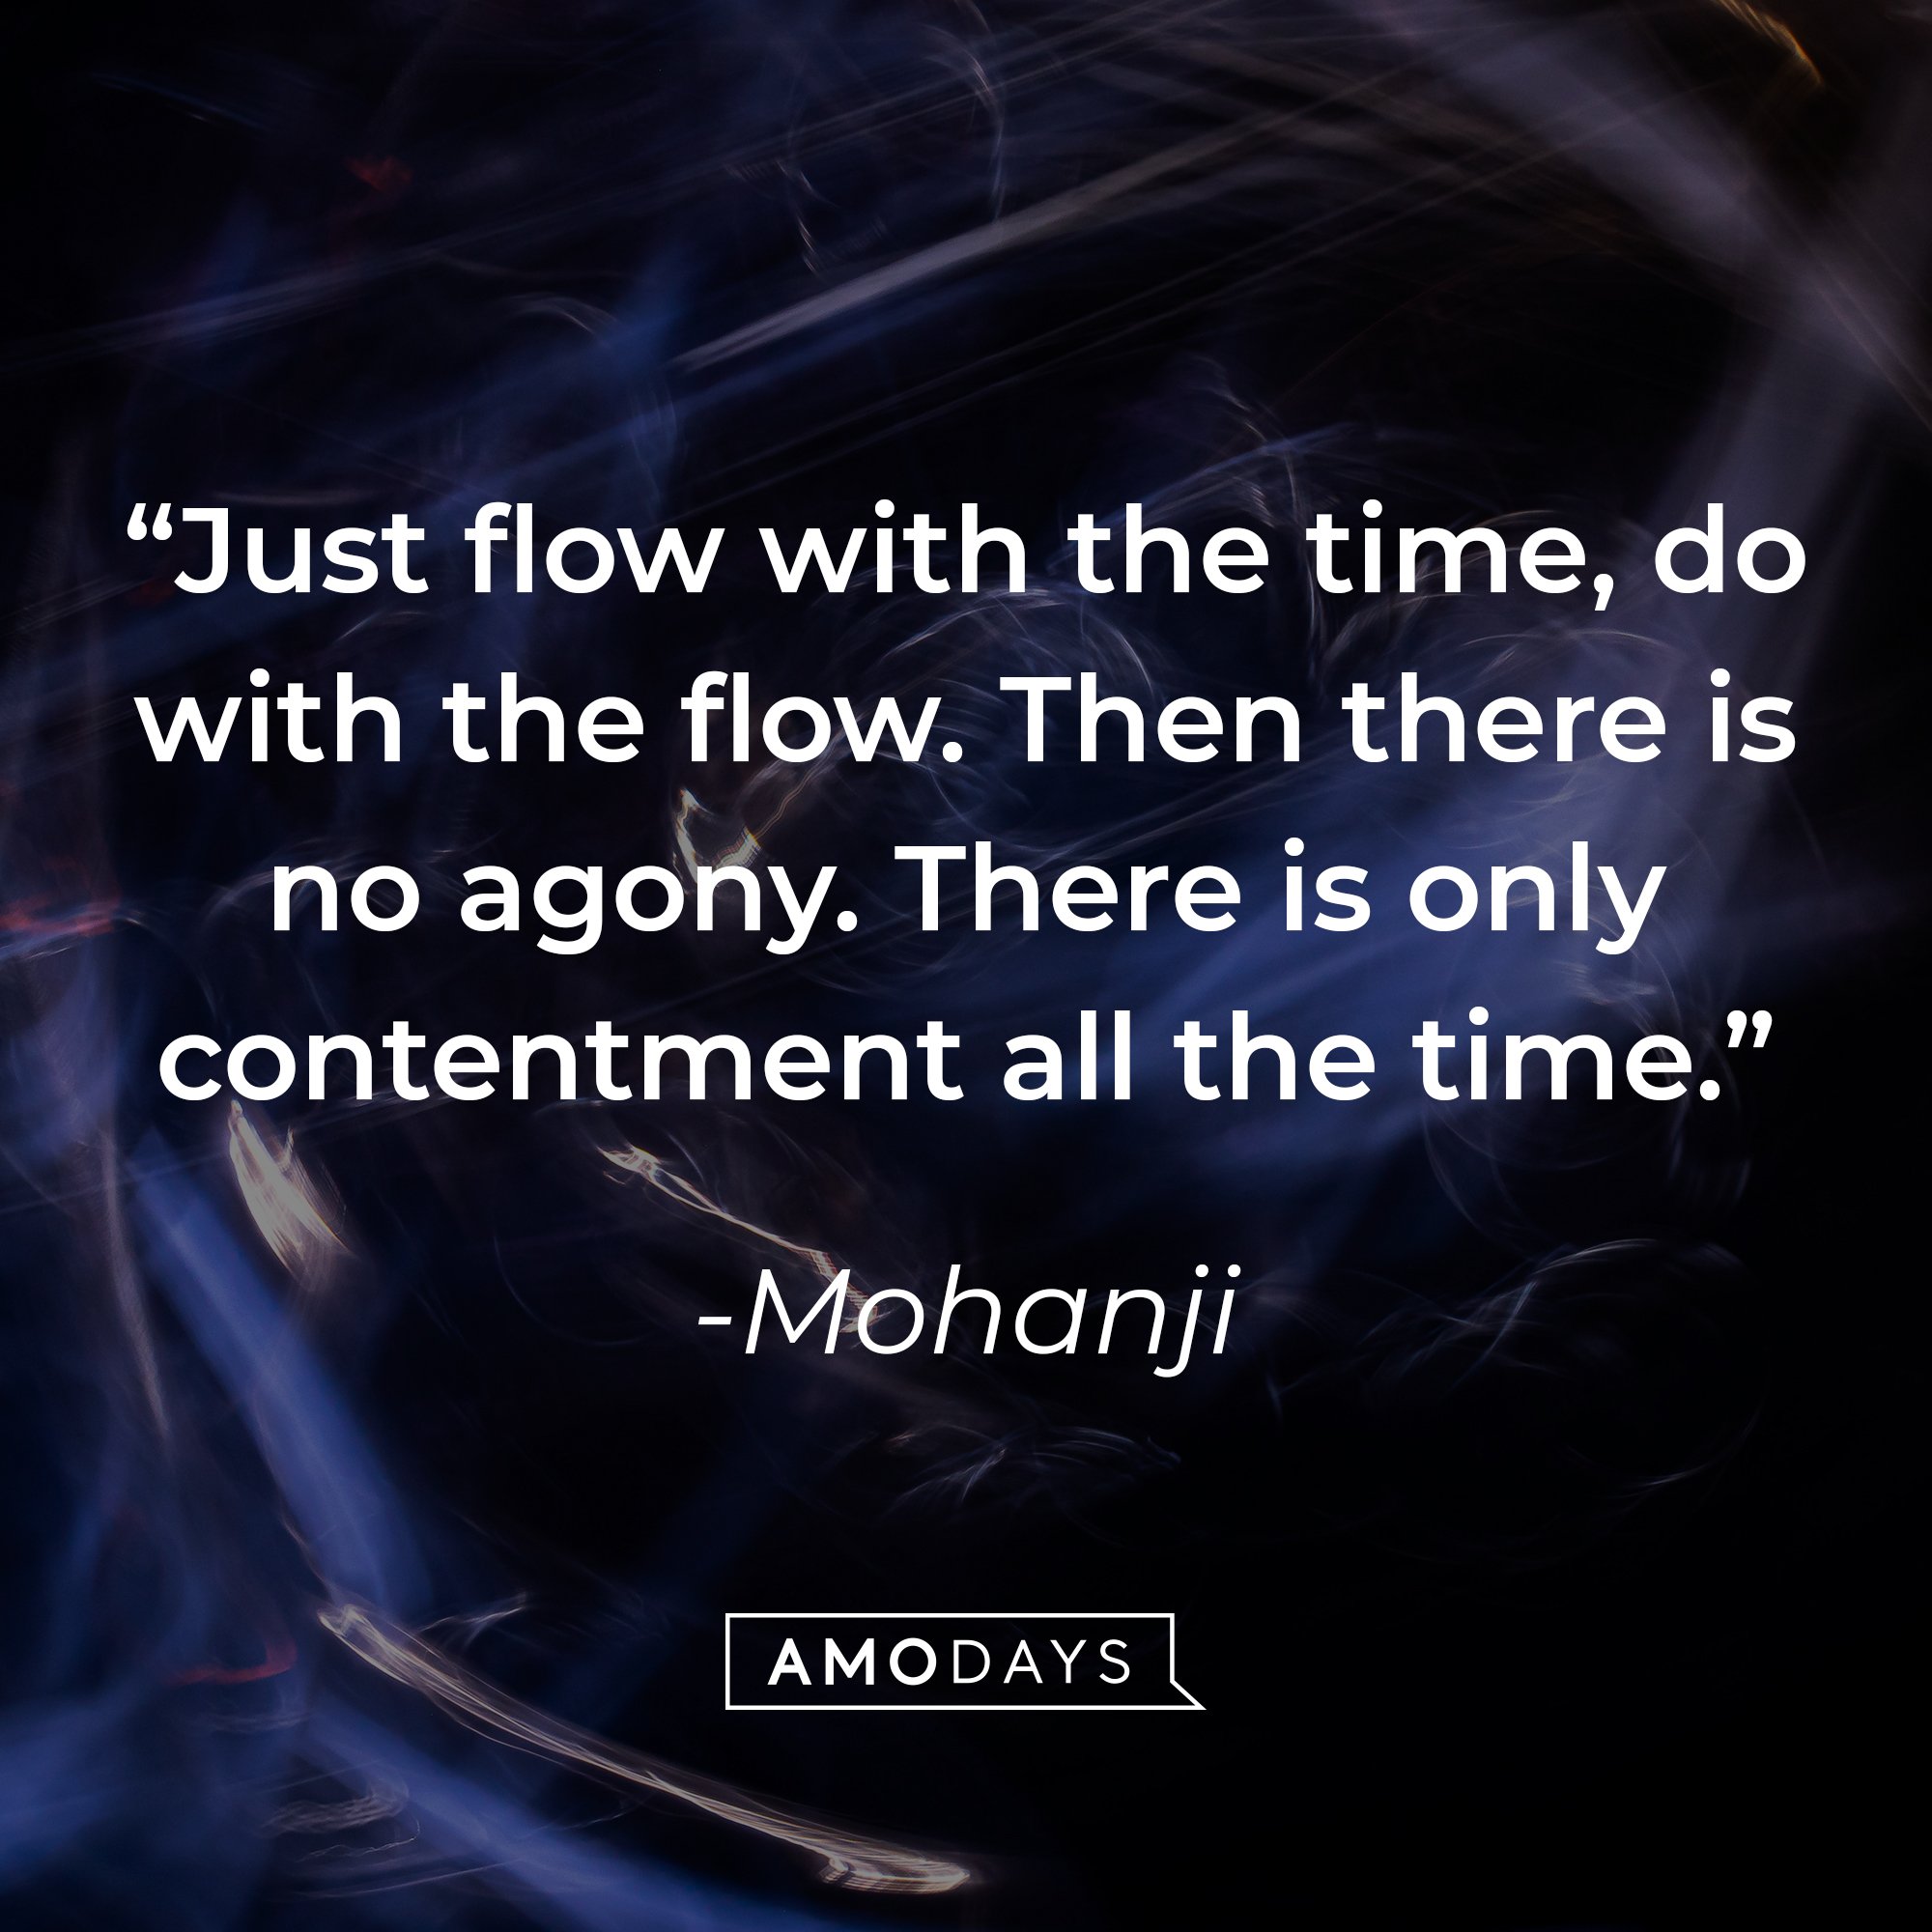 Mohanji's quote: "Just flow with the time, do with the flow. Then there is no agony. There is only contentment all the time." | Image: AmoDays